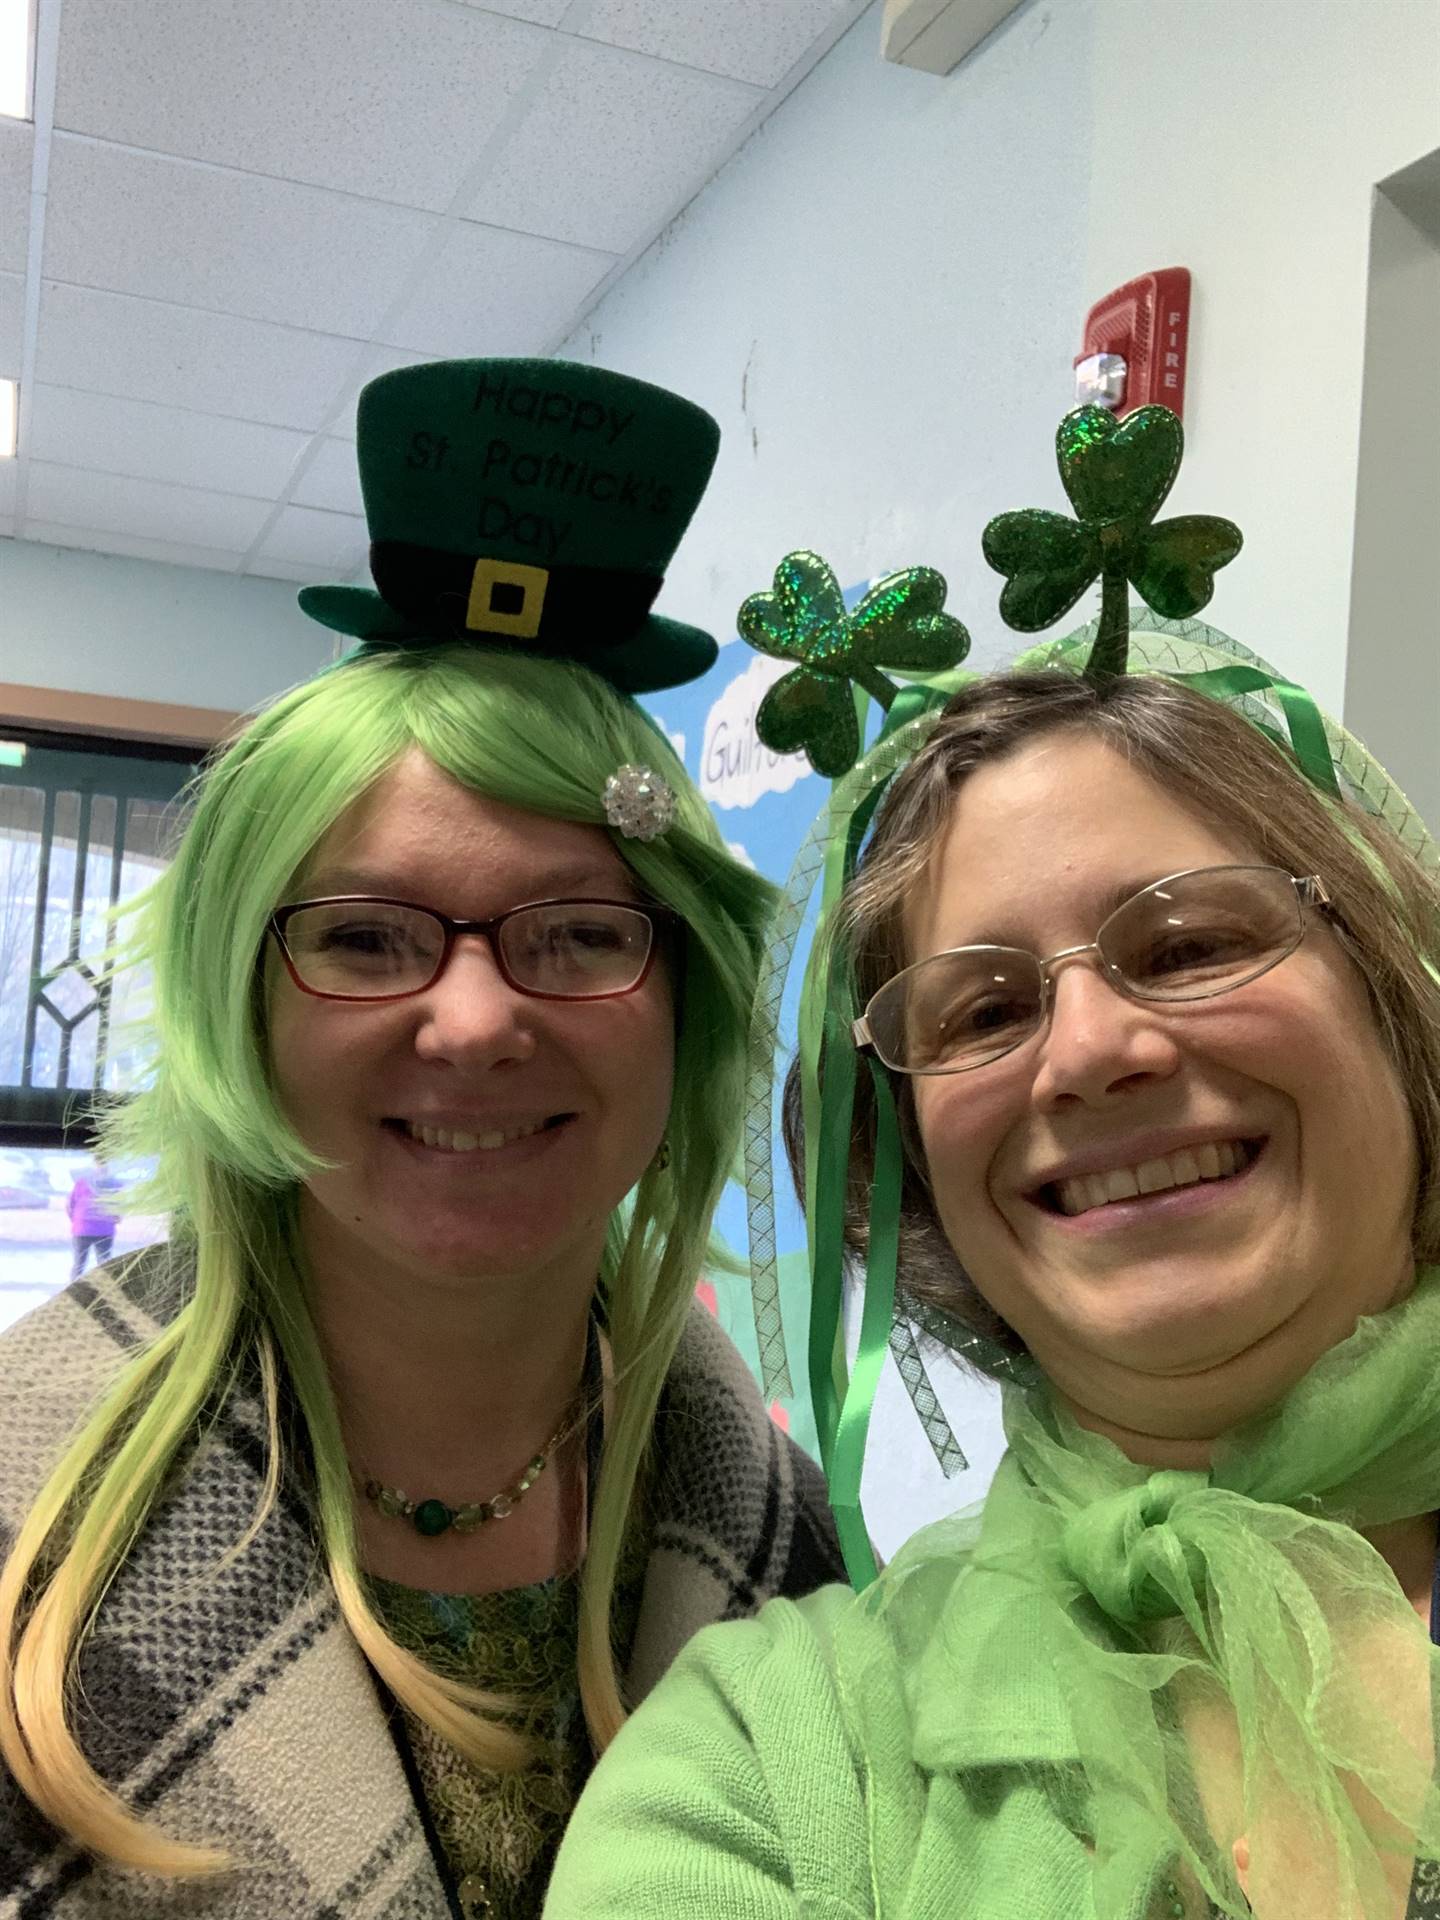 2 staff members dressed in green with green headbands